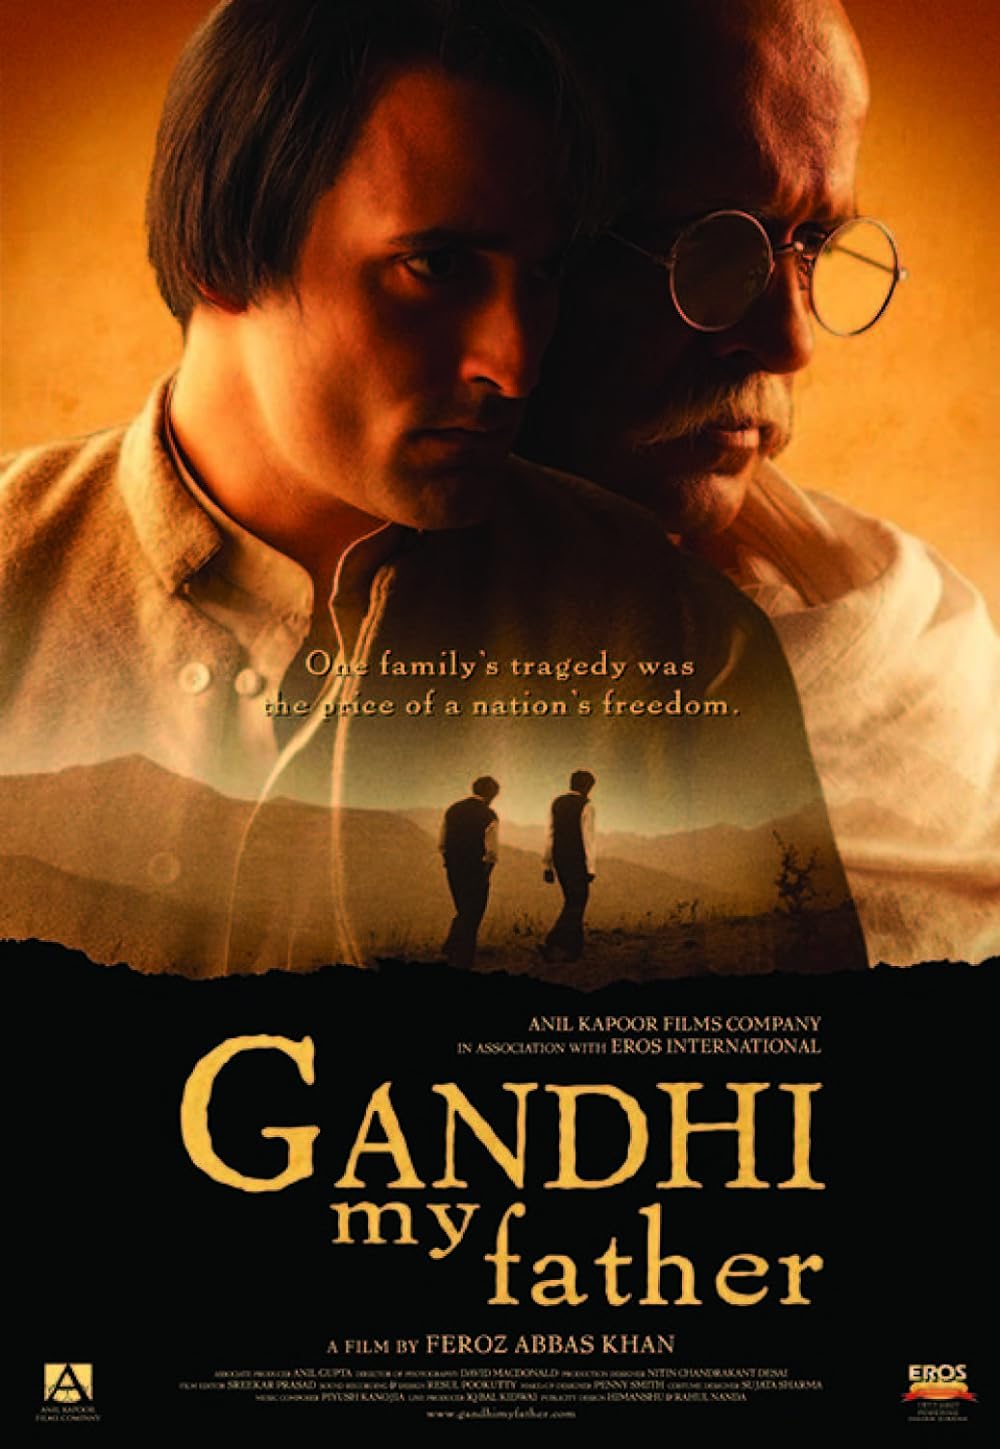 Gandhi, My Father (2007)A unique Bollywood film that explores the strained relationship between Mahatma Gandhi and his son. Darshan Jariwala portrays Gandhi, and Akshaye Khanna plays Harilal Gandhi. Alongside depicting Gandhi's role in the freedom struggle, it delves into aspects of his personal life with his family.